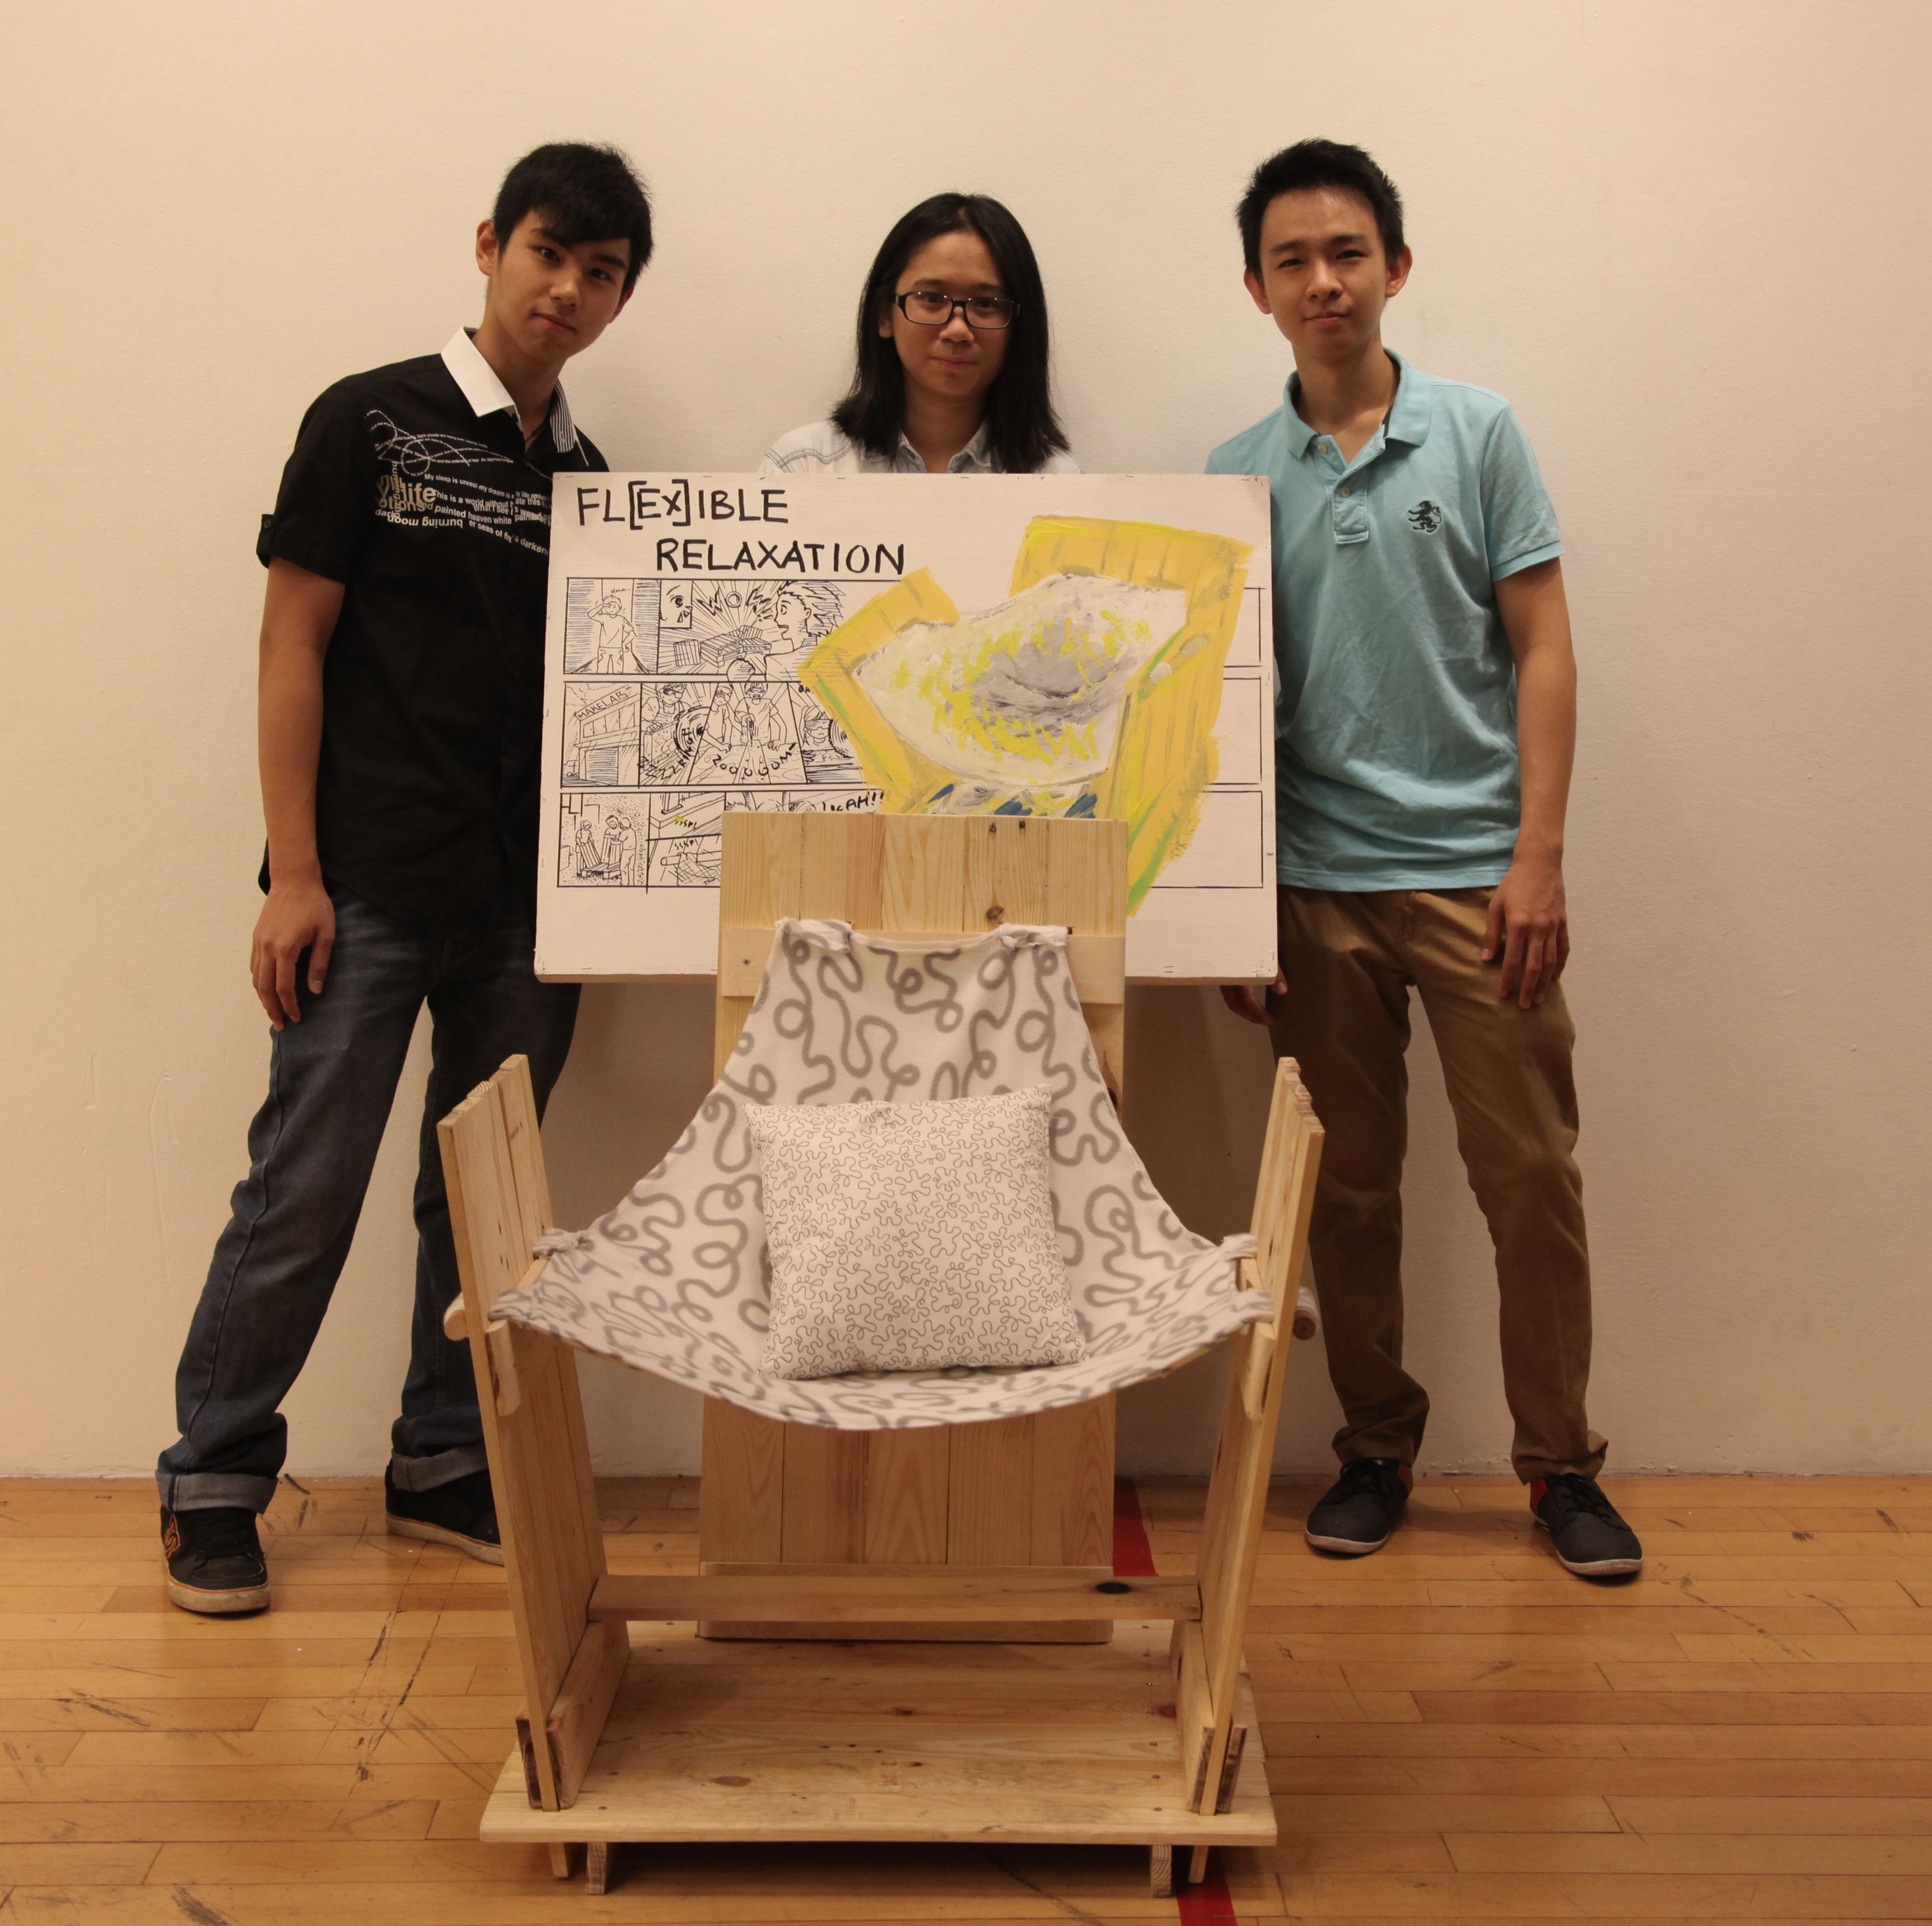 UCSI University's award winning innovative chair design was themed “Flexible Relaxation” and utilised old planks and discarded fabrics to ensure it was eco-friendly. 